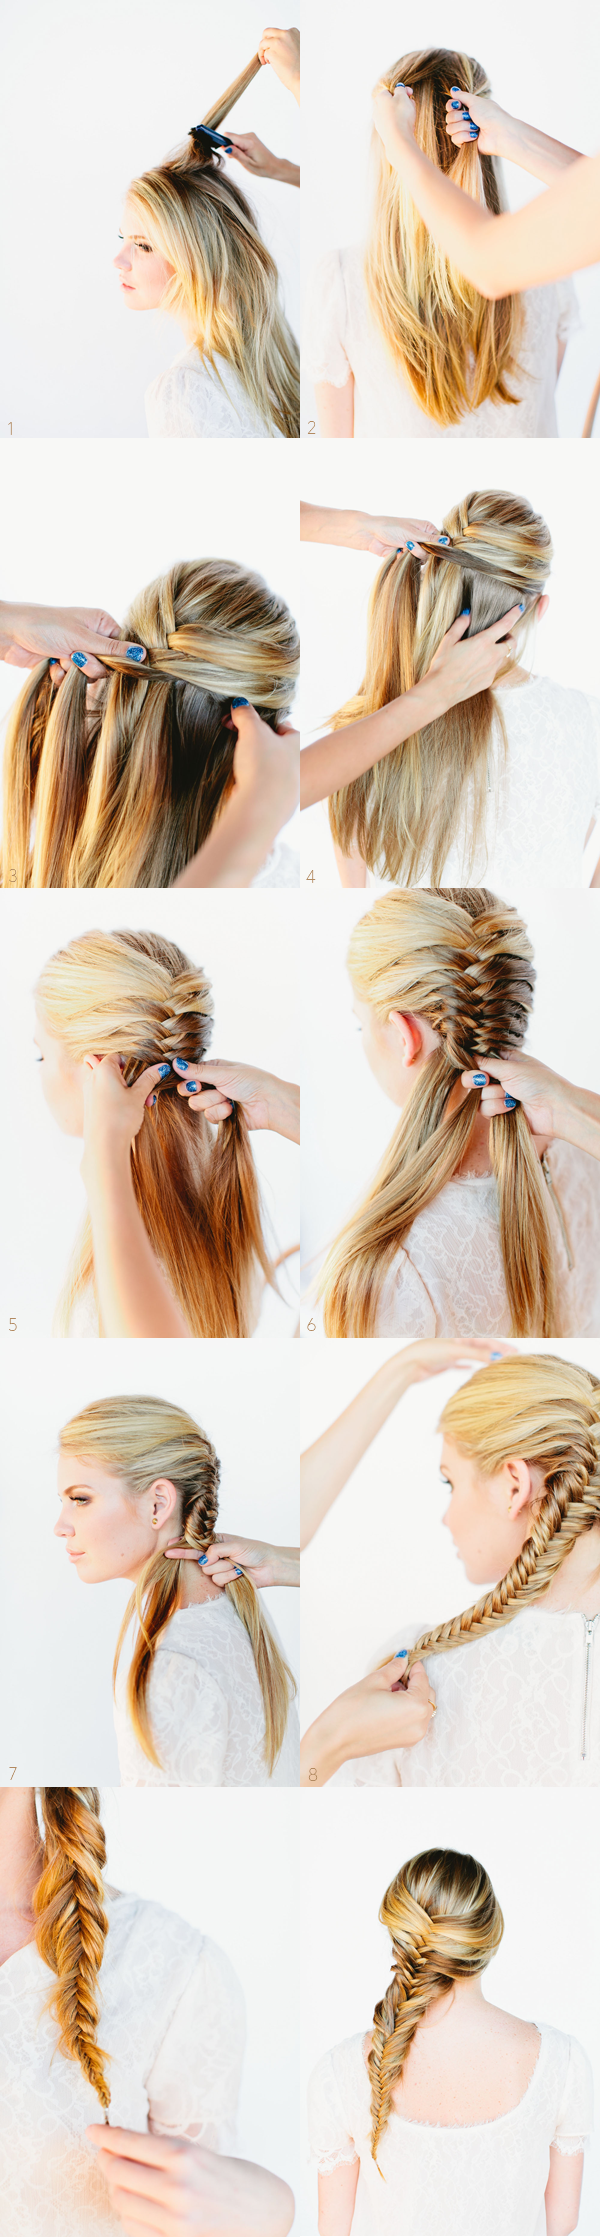 17 Romantic Hairstyle Ideas and Tutorials  (1)